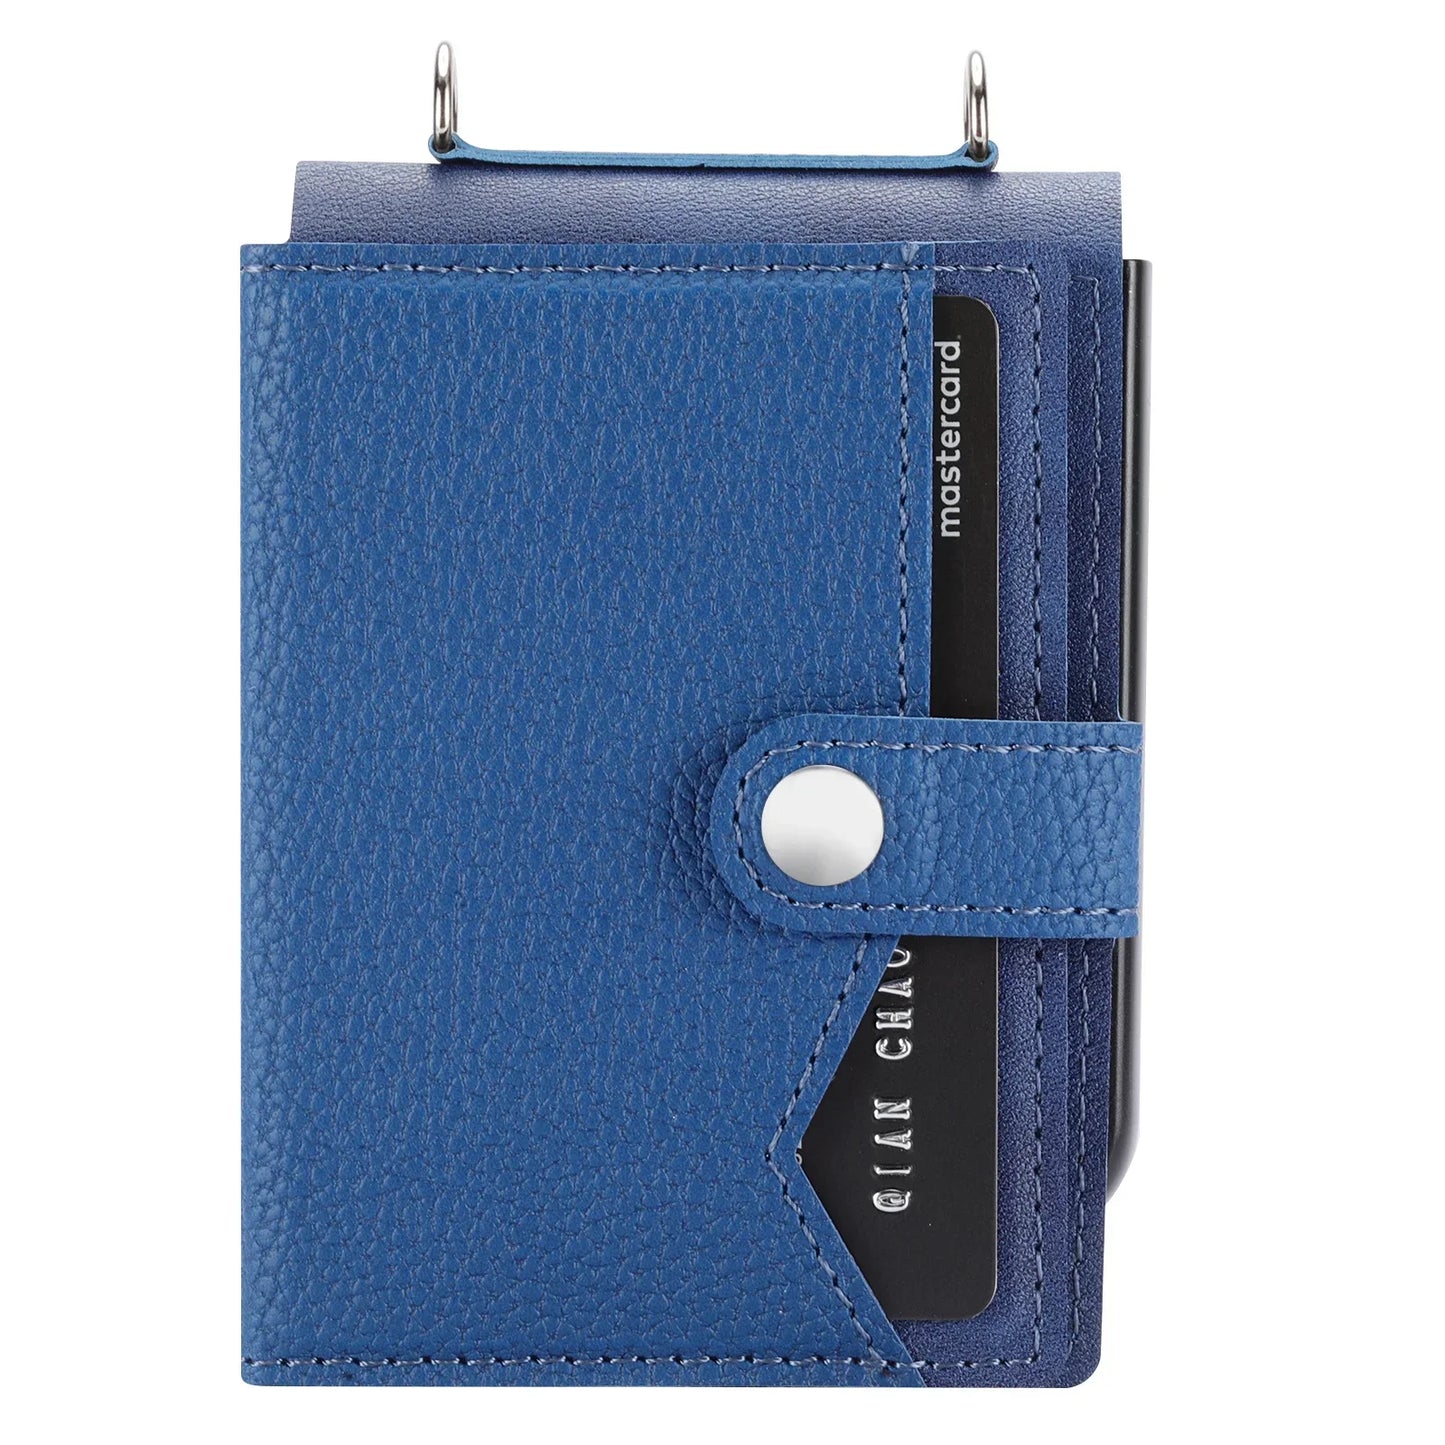 Z Flip Protective Leather Case with Cards Solt